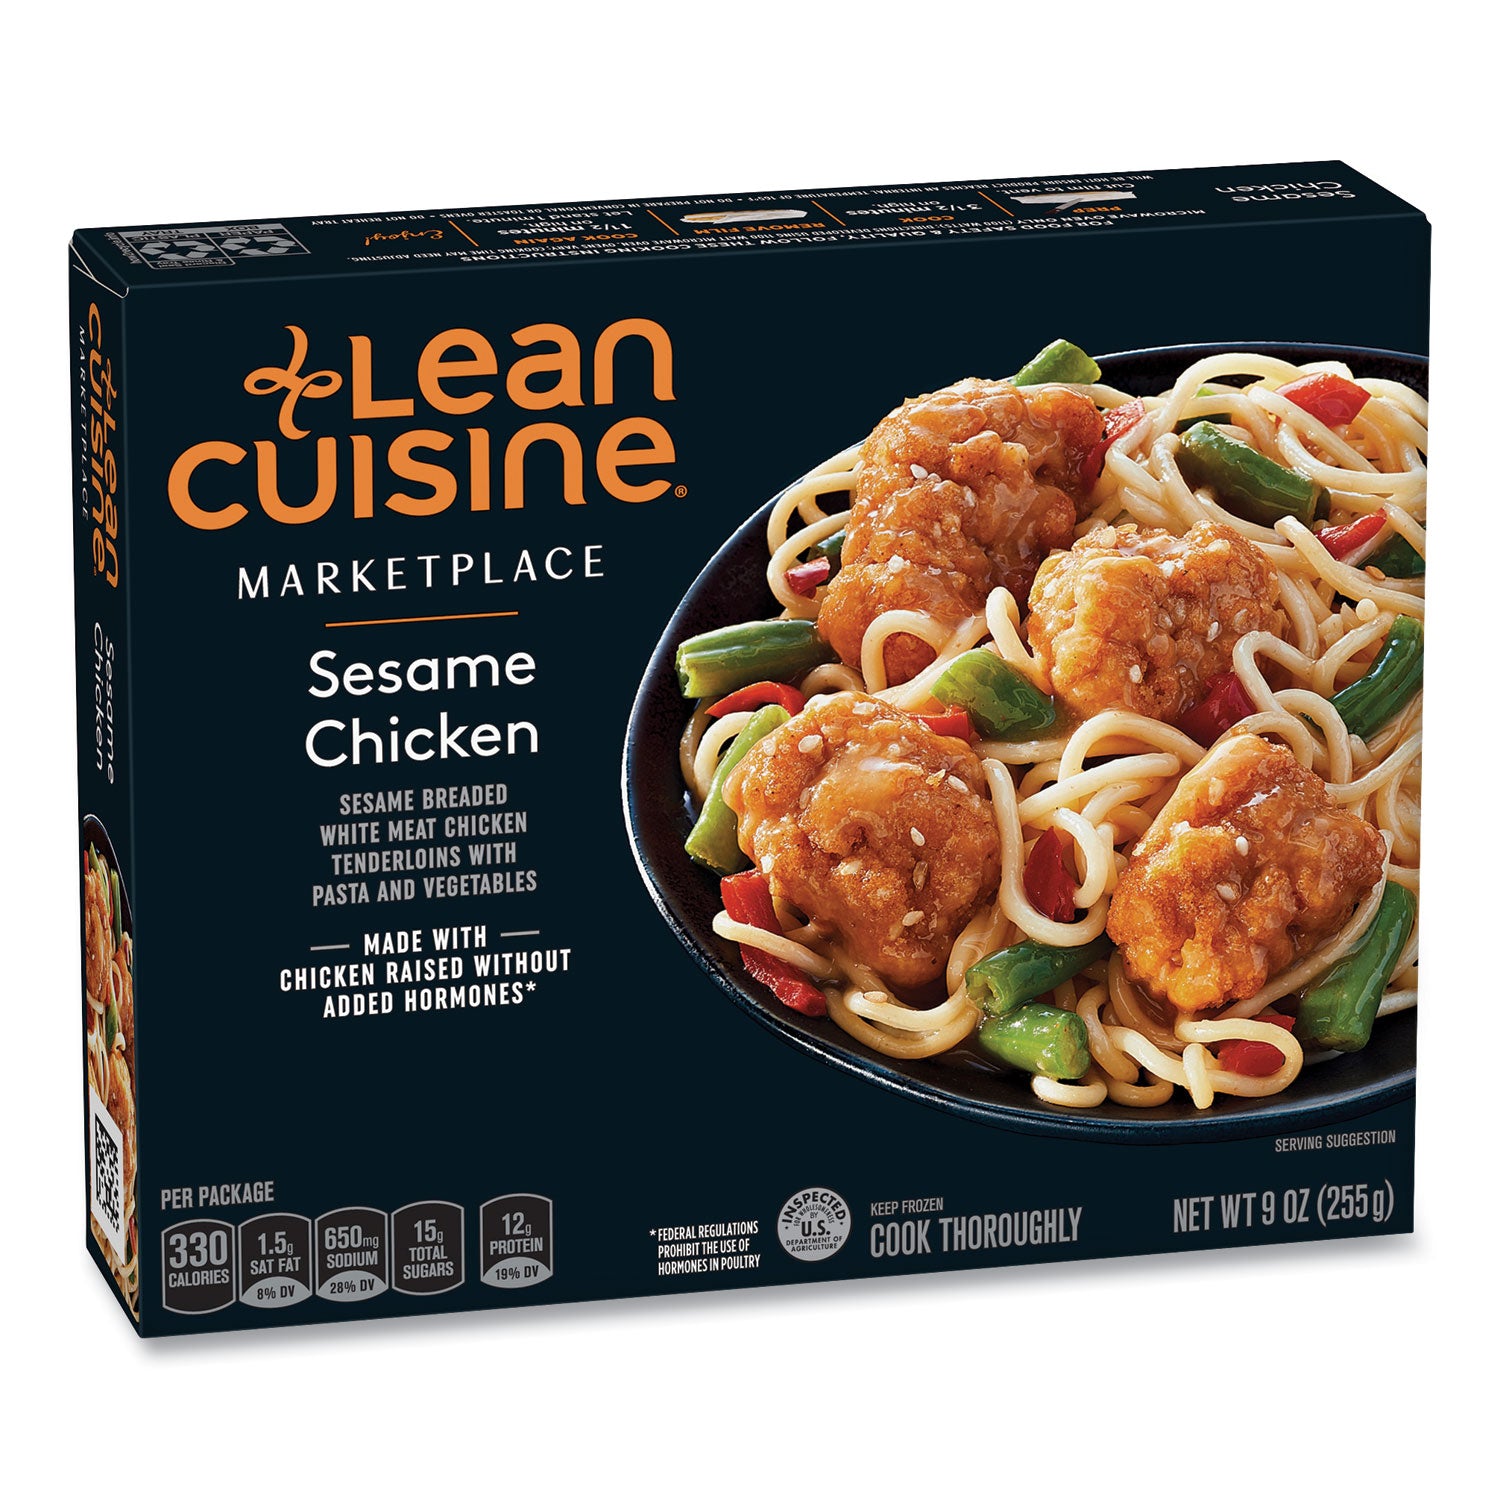 marketplace-sesame-chicken-9-oz-box-3-boxes-pack-ships-in-1-3-business-days_grr90300125 - 1